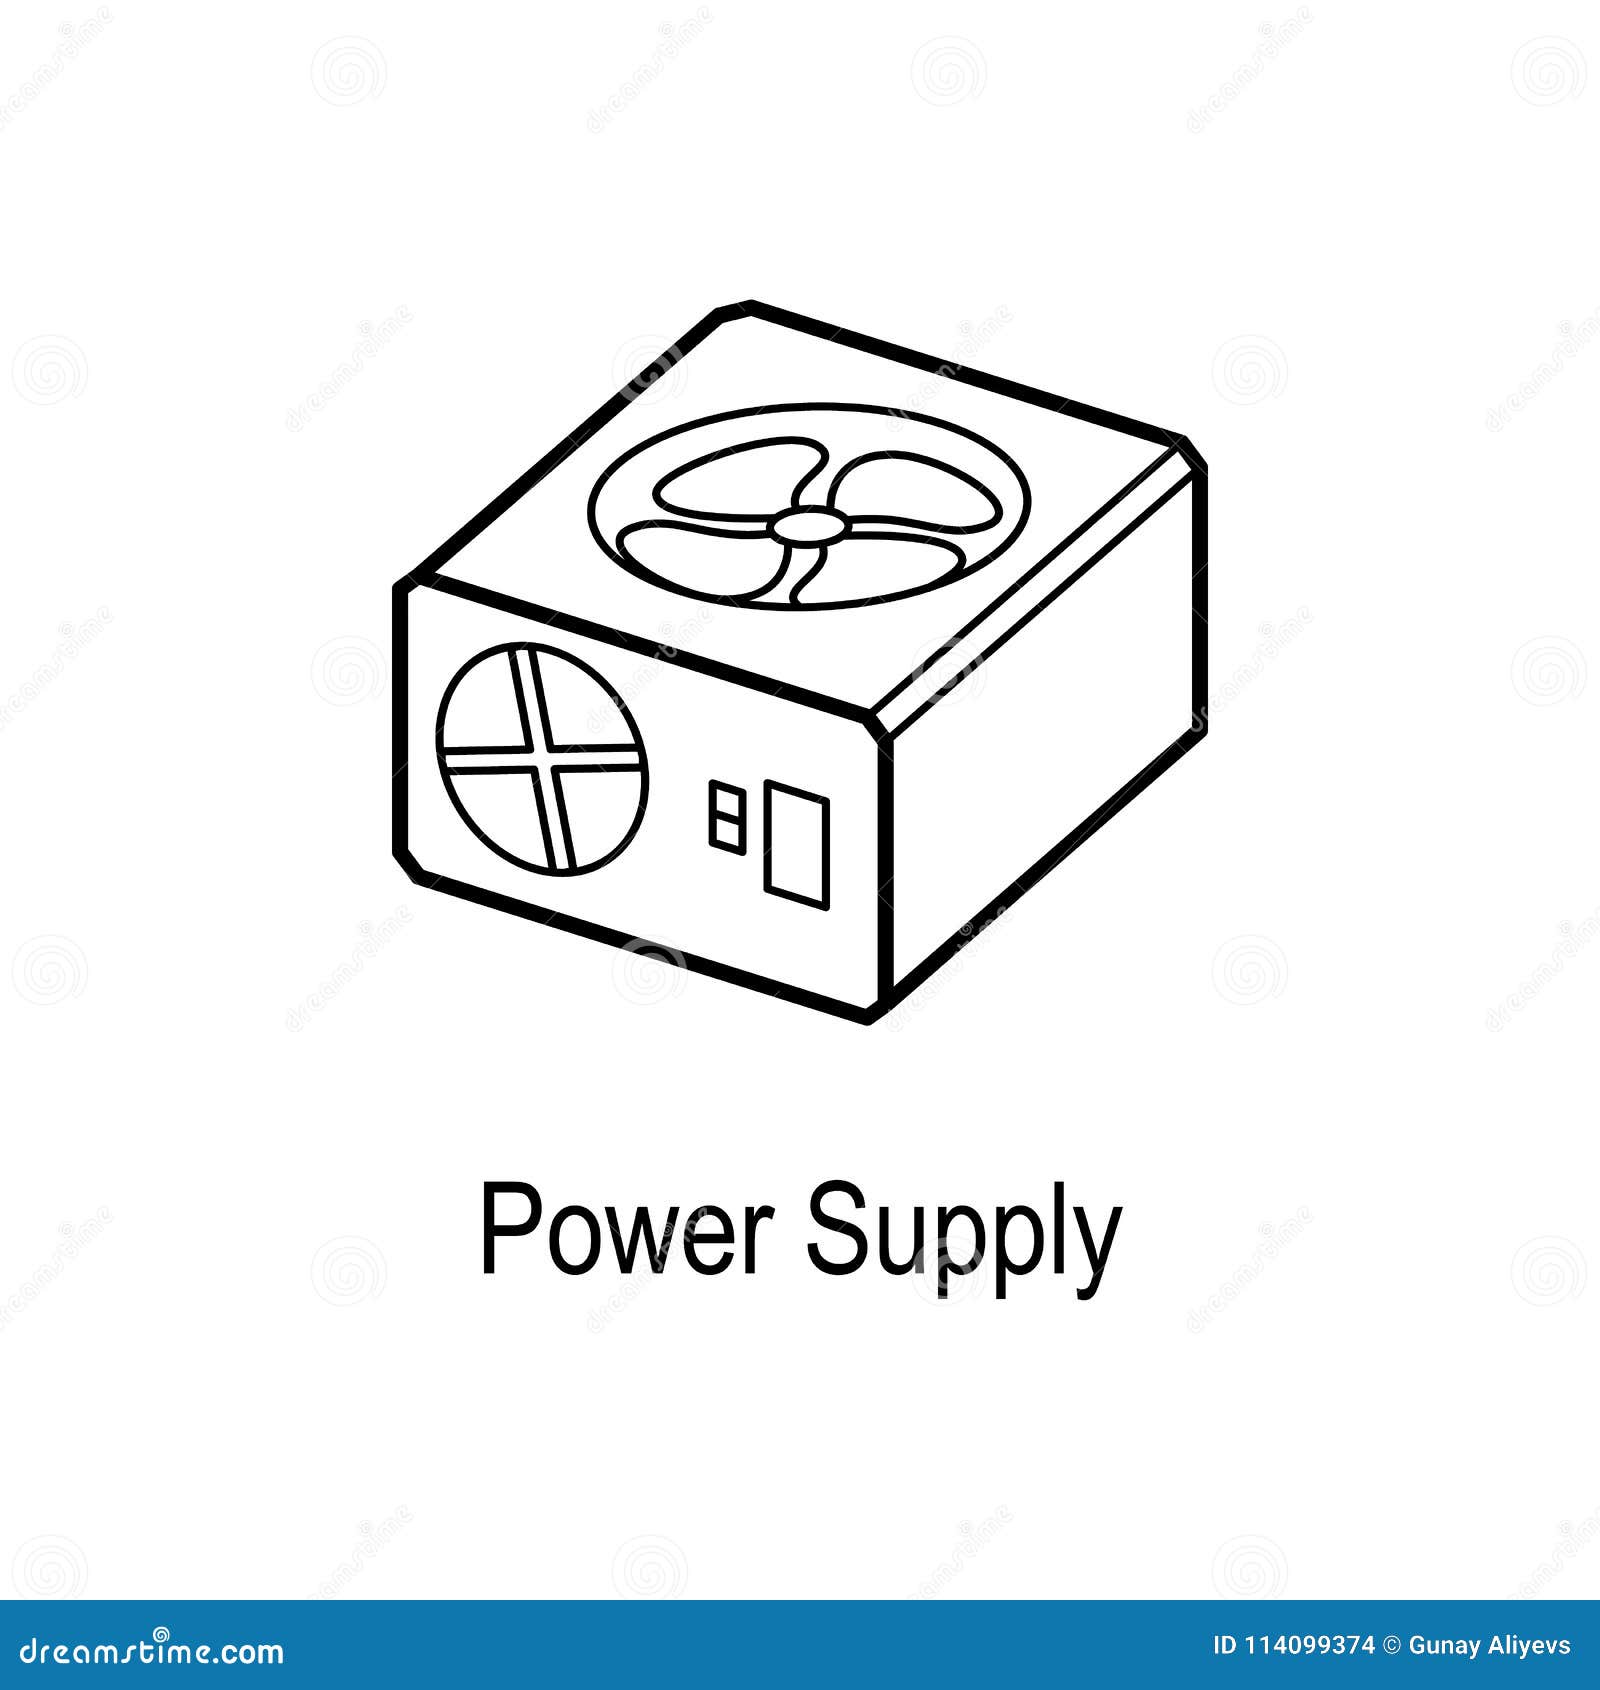 Power supply icon  CanStock